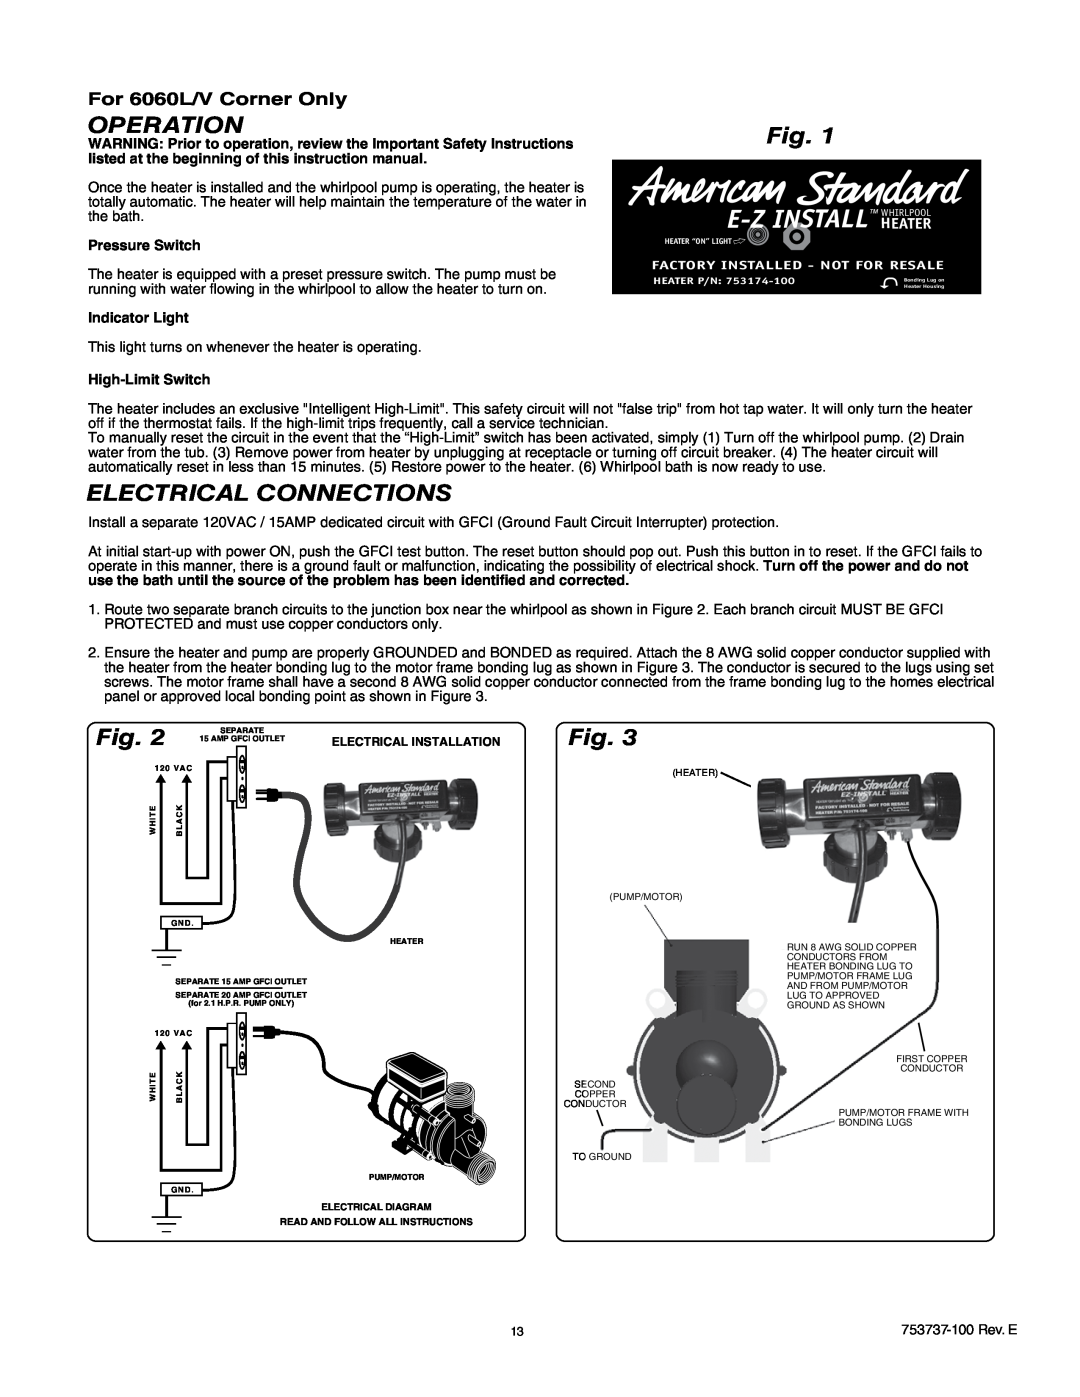 American Standard 2425L / V, 2645L / V E-Z Install, Operation, Electrical Connections, Pressure Switch, Indicator Light 